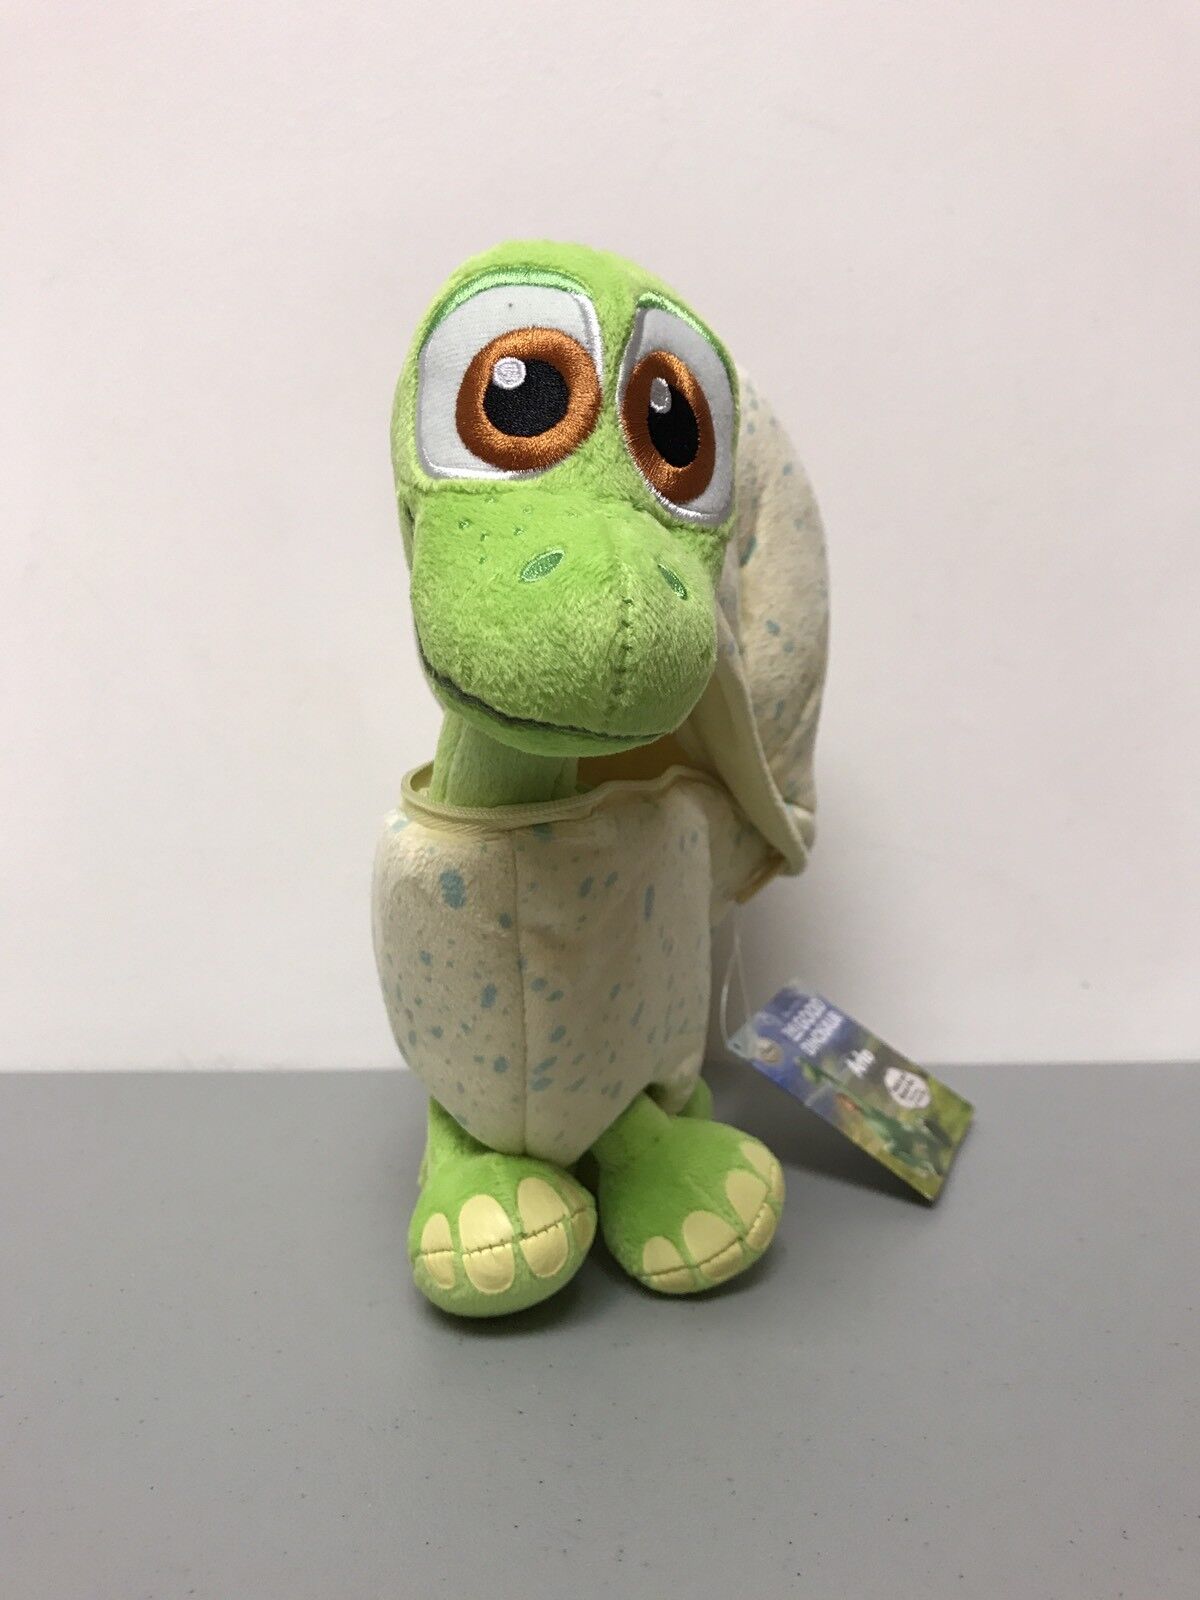 Disney Store Baby Arlo Hatch & Reveal Small Plush Good Dinosaur - NEW with Tags